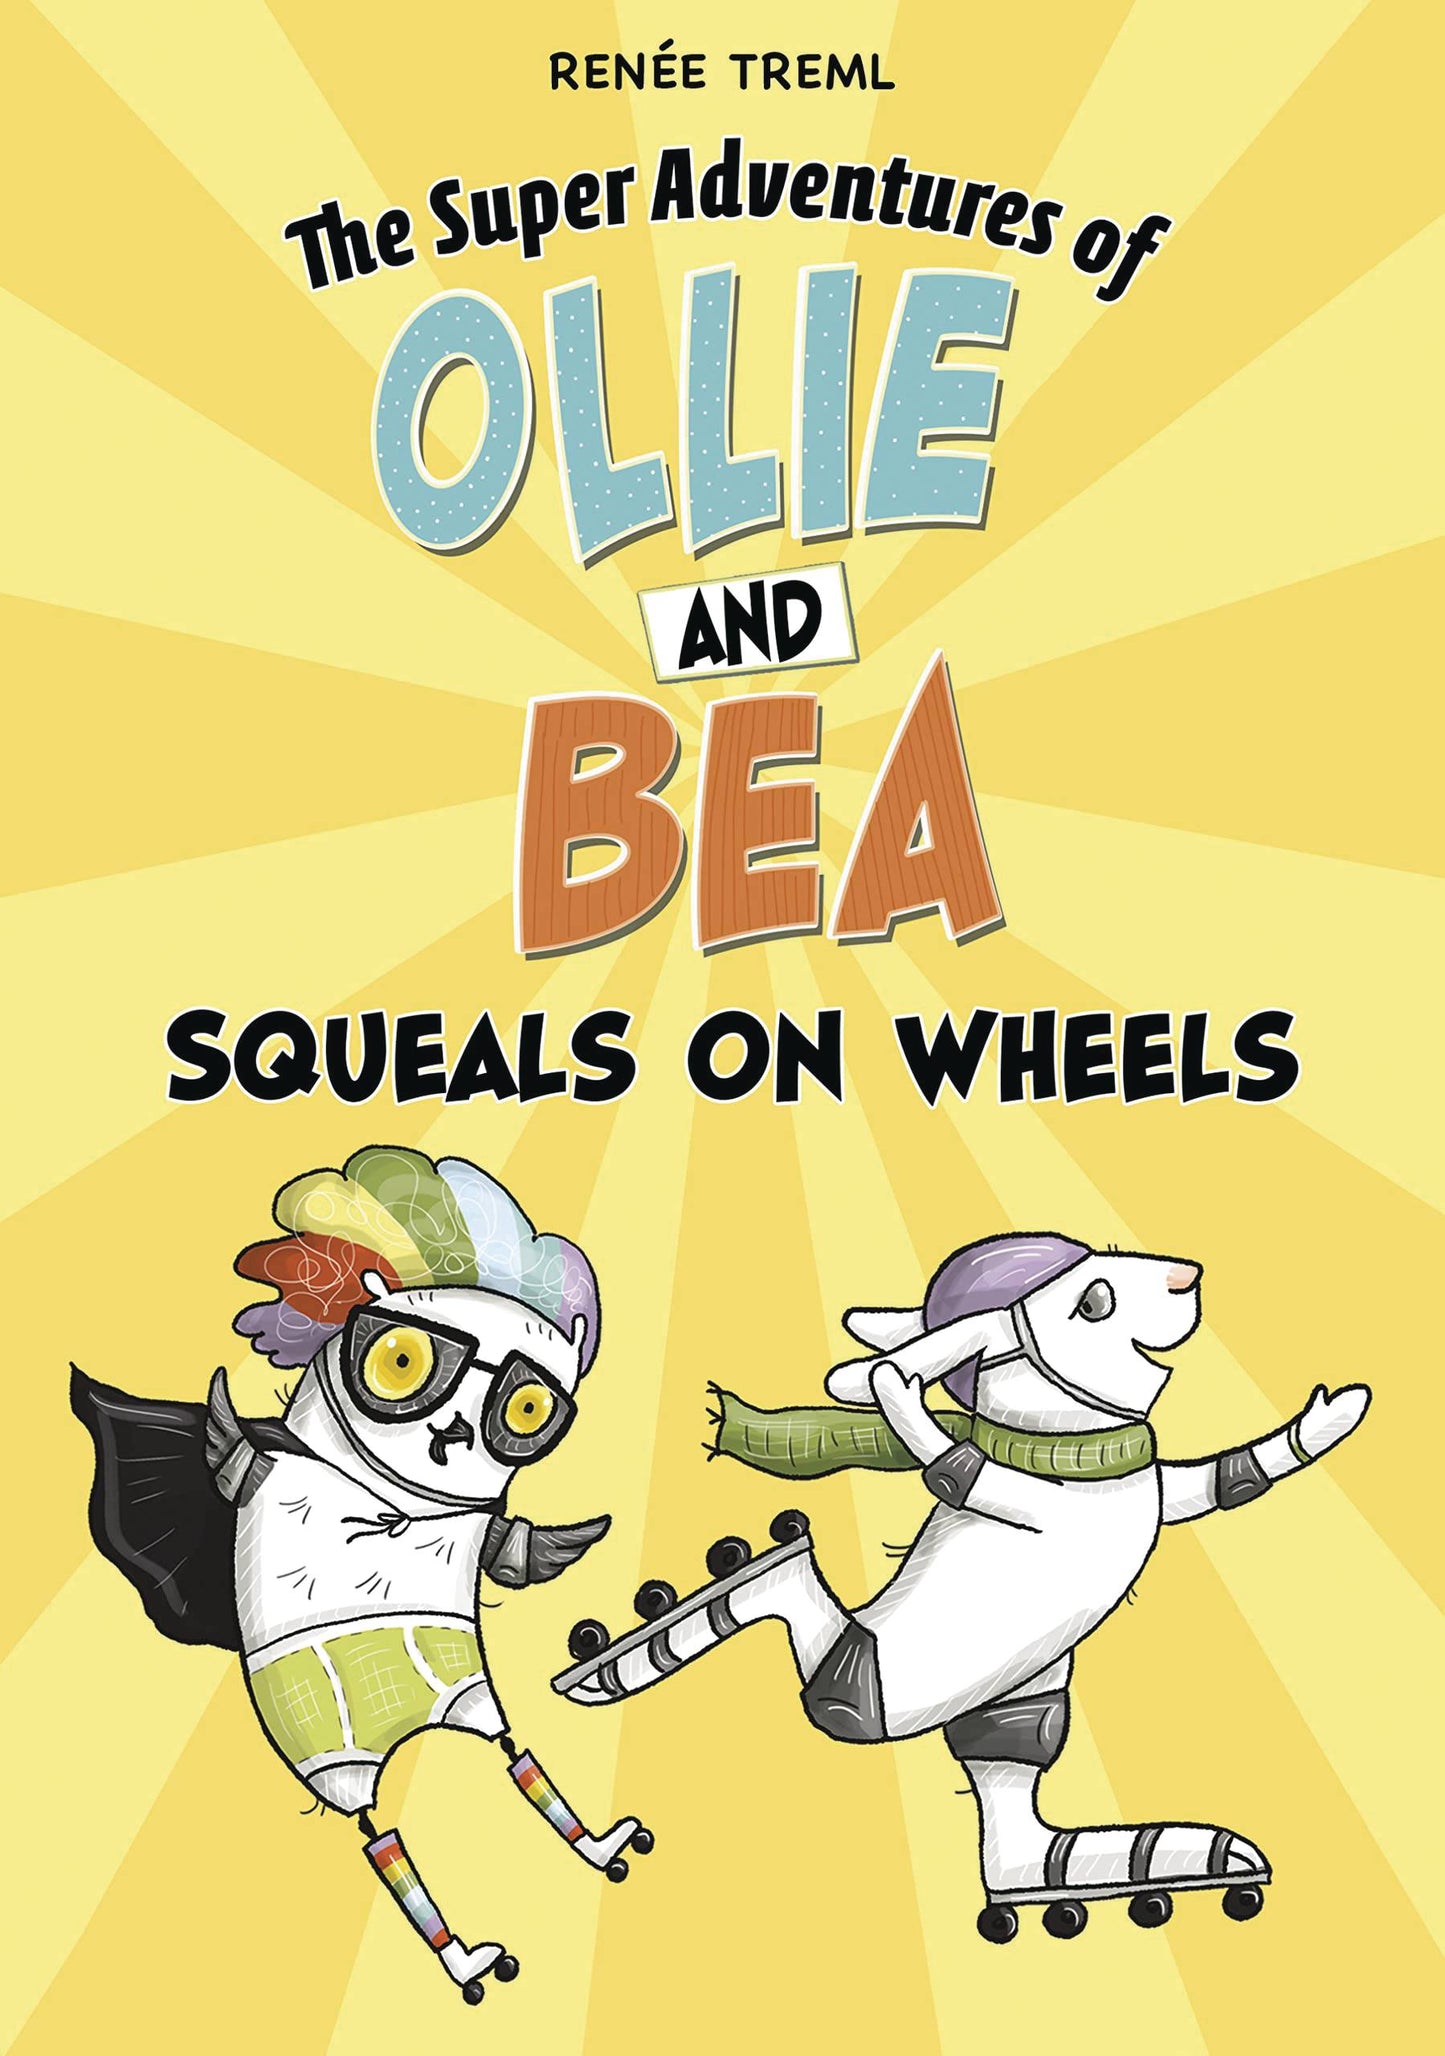 Super Adventures of Ollie & Bea Squeals On Wheels Graphic Novel